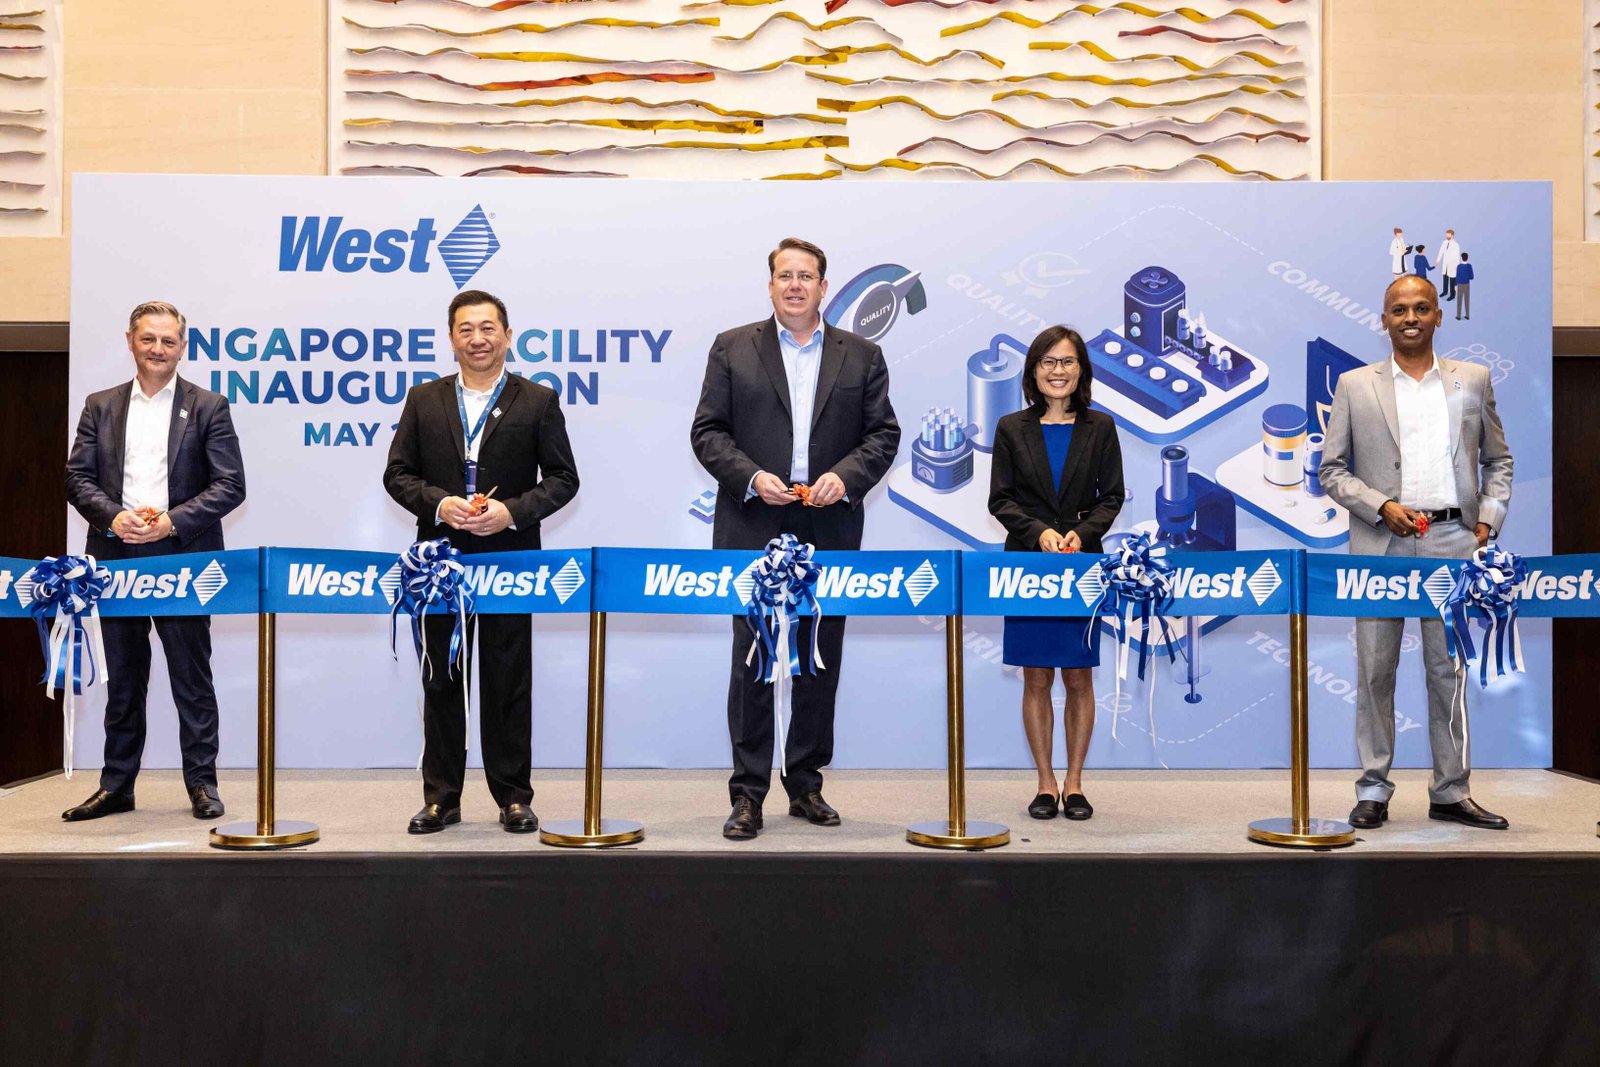 From Left to Right: Bernard Birkett, Senior Vice President, Chief Financial and Operations  Officer; Marcus Tang, Senior Director, Operations, Jurong; Eric Green, President, CEO and  Chair of the Board of Directors; Goh Wan Yee, SVP and Head of Healthcare, EDB; and Alagu  Subramaniam, Senior Director, Sales and Commercial Operations, Asia Pacific at the  inauguration ceremony of West's upgraded manufacturing facility in Singapore